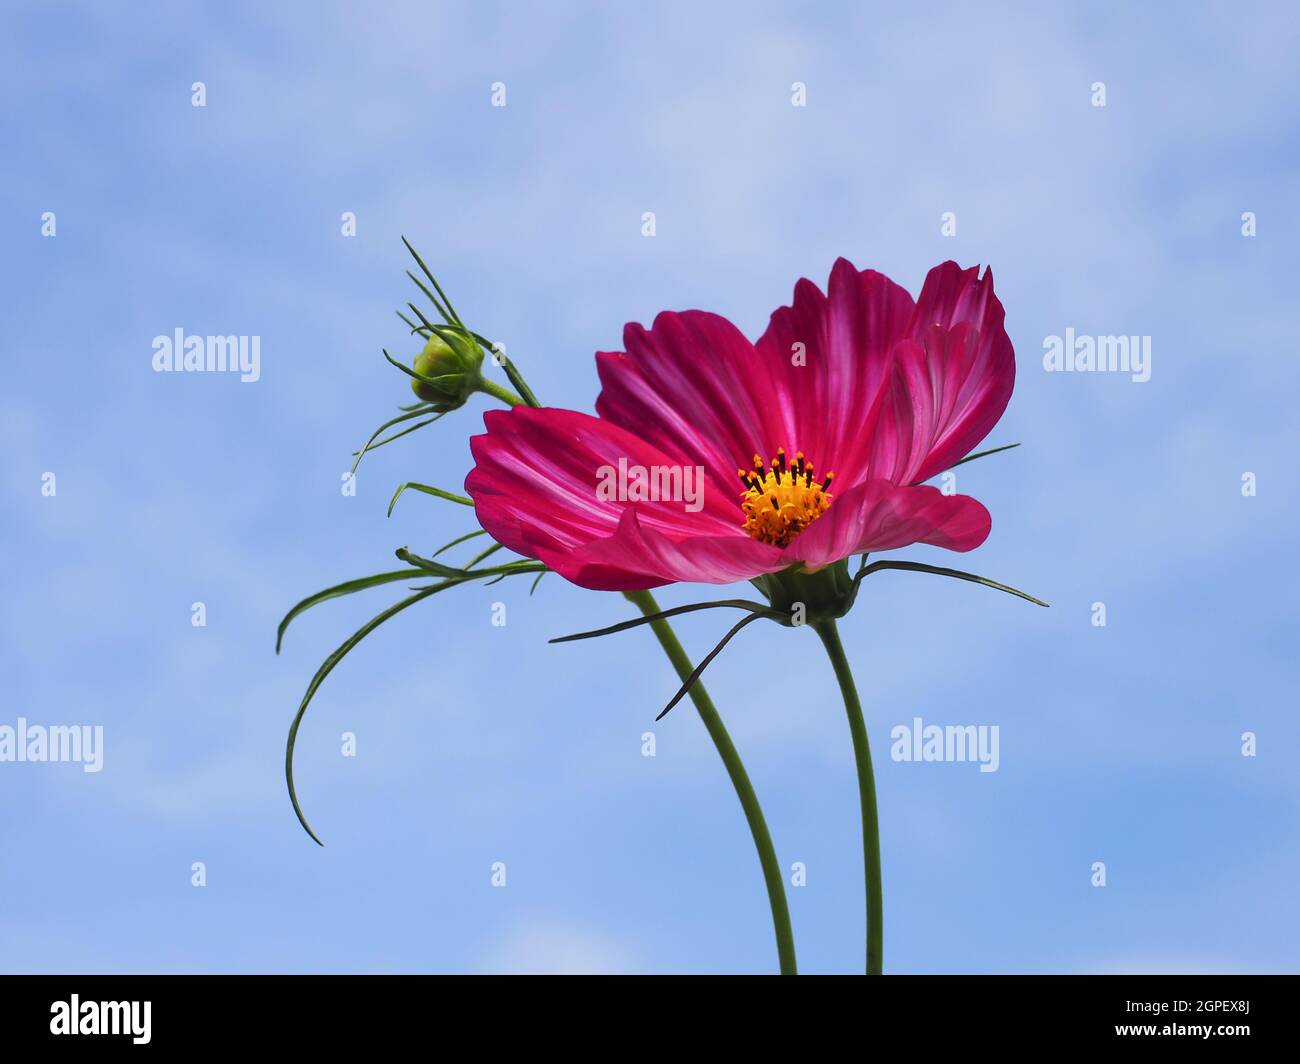 Pink Cosmea or Mexican aster flower in the blue sky background. Cosmos bipinnatus is herbaceous, flowering plant in the sunflower family Asteraceae. Stock Photo